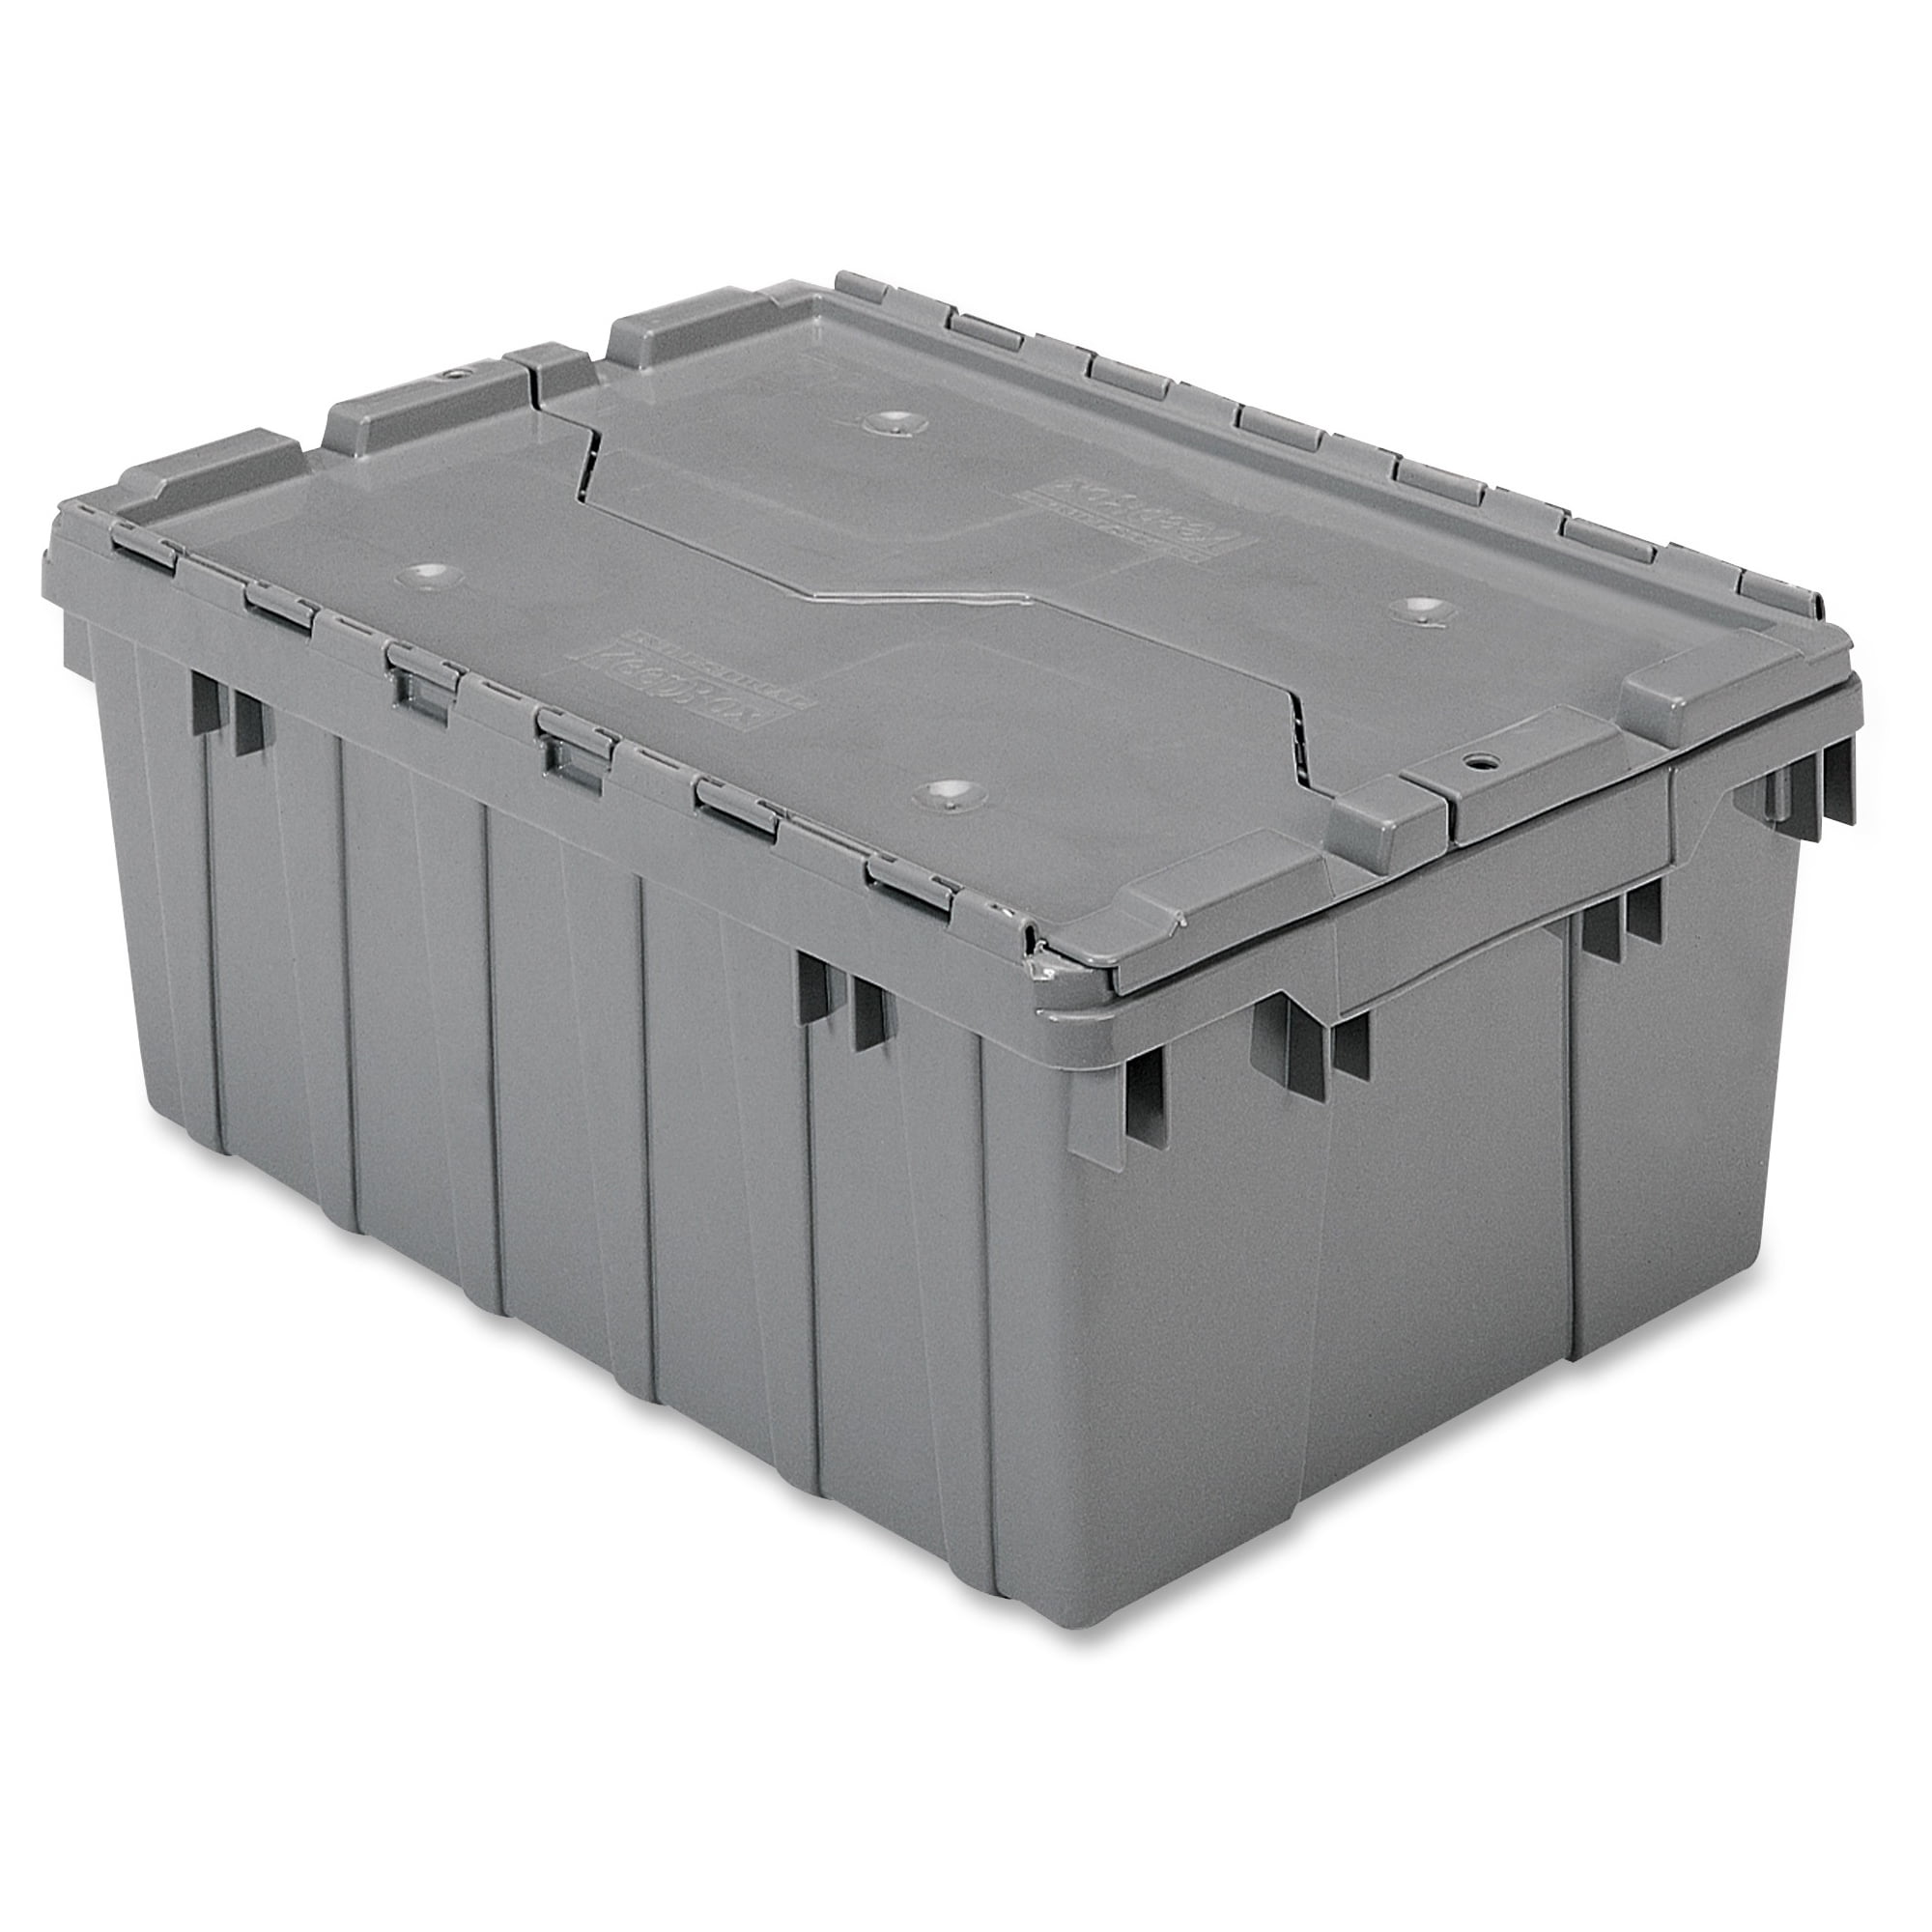 Akro-Mils 66486 FILEB 12-Gallon Plastic Storage Hanging File Box with Attached Lid 21-1/2-Inch by 15-Inch by 12-1/2-Inch Semi-Clear 2 Pack 21-1/2 by 15 by 12-1/2